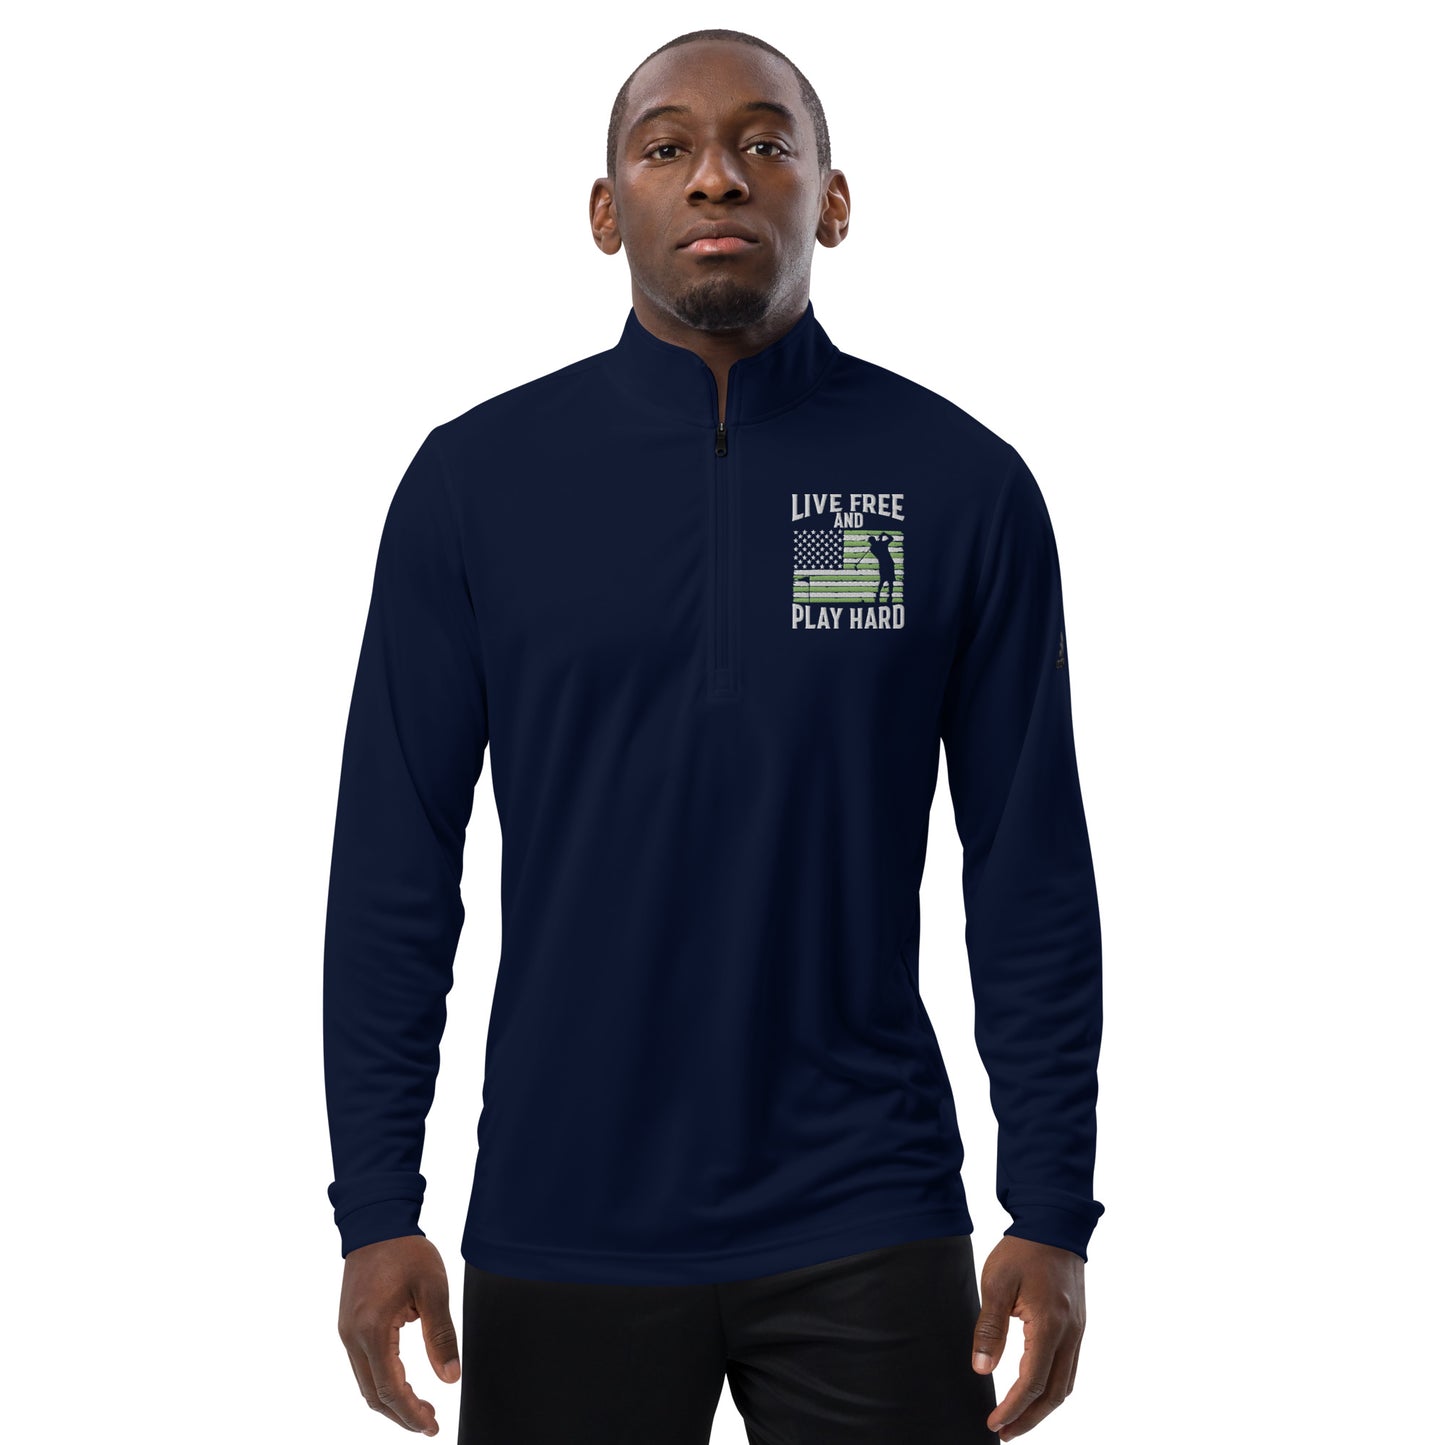 Adidas 'Live Free and Play Hard' 1/4 Zip Golf Pullover (Military Appreciation)